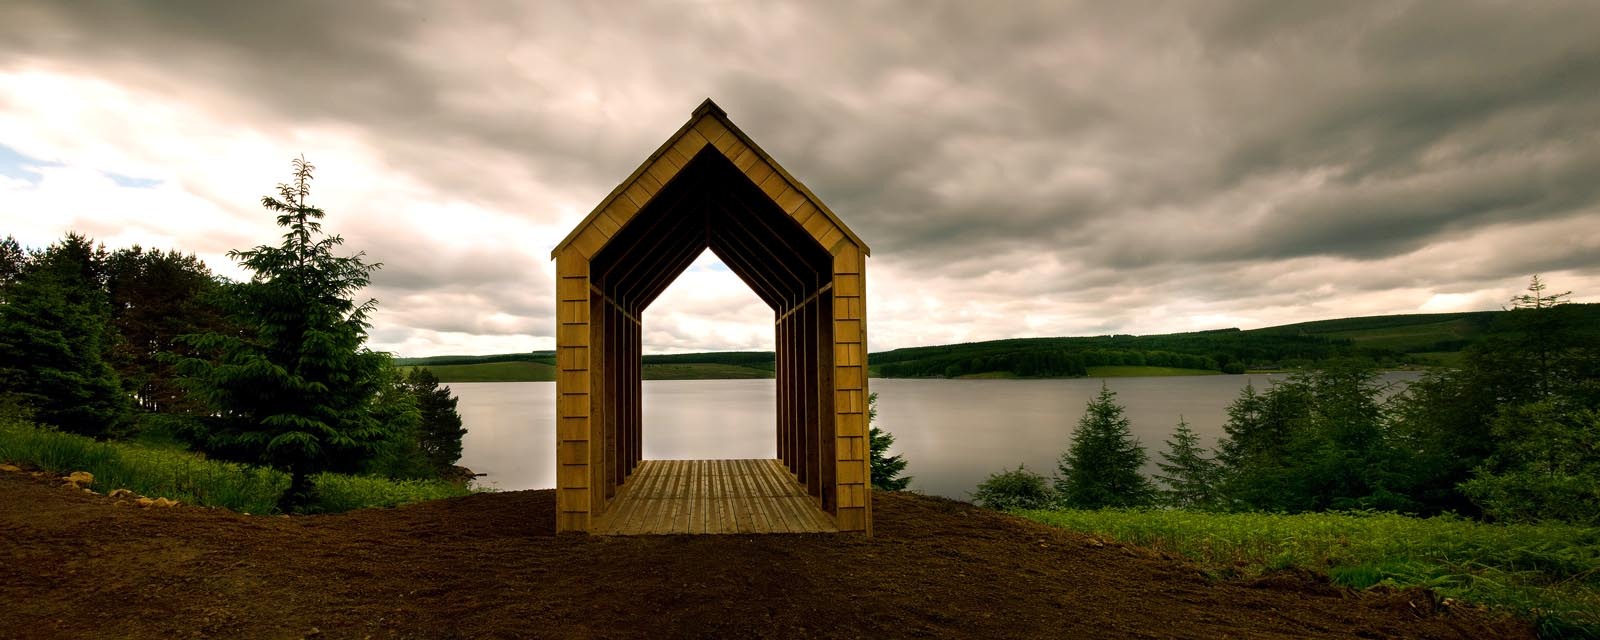 ...and Robin&rsquo;s Hut &ndash; &ldquo;(Robin) liked climbing trees and building wooden houses for birds...&rdquo; &ndash; &ldquo;physical manifestations of a love story embedded in the landscape&rdquo; of Kielder Water and Forest Park. (Photo courtes